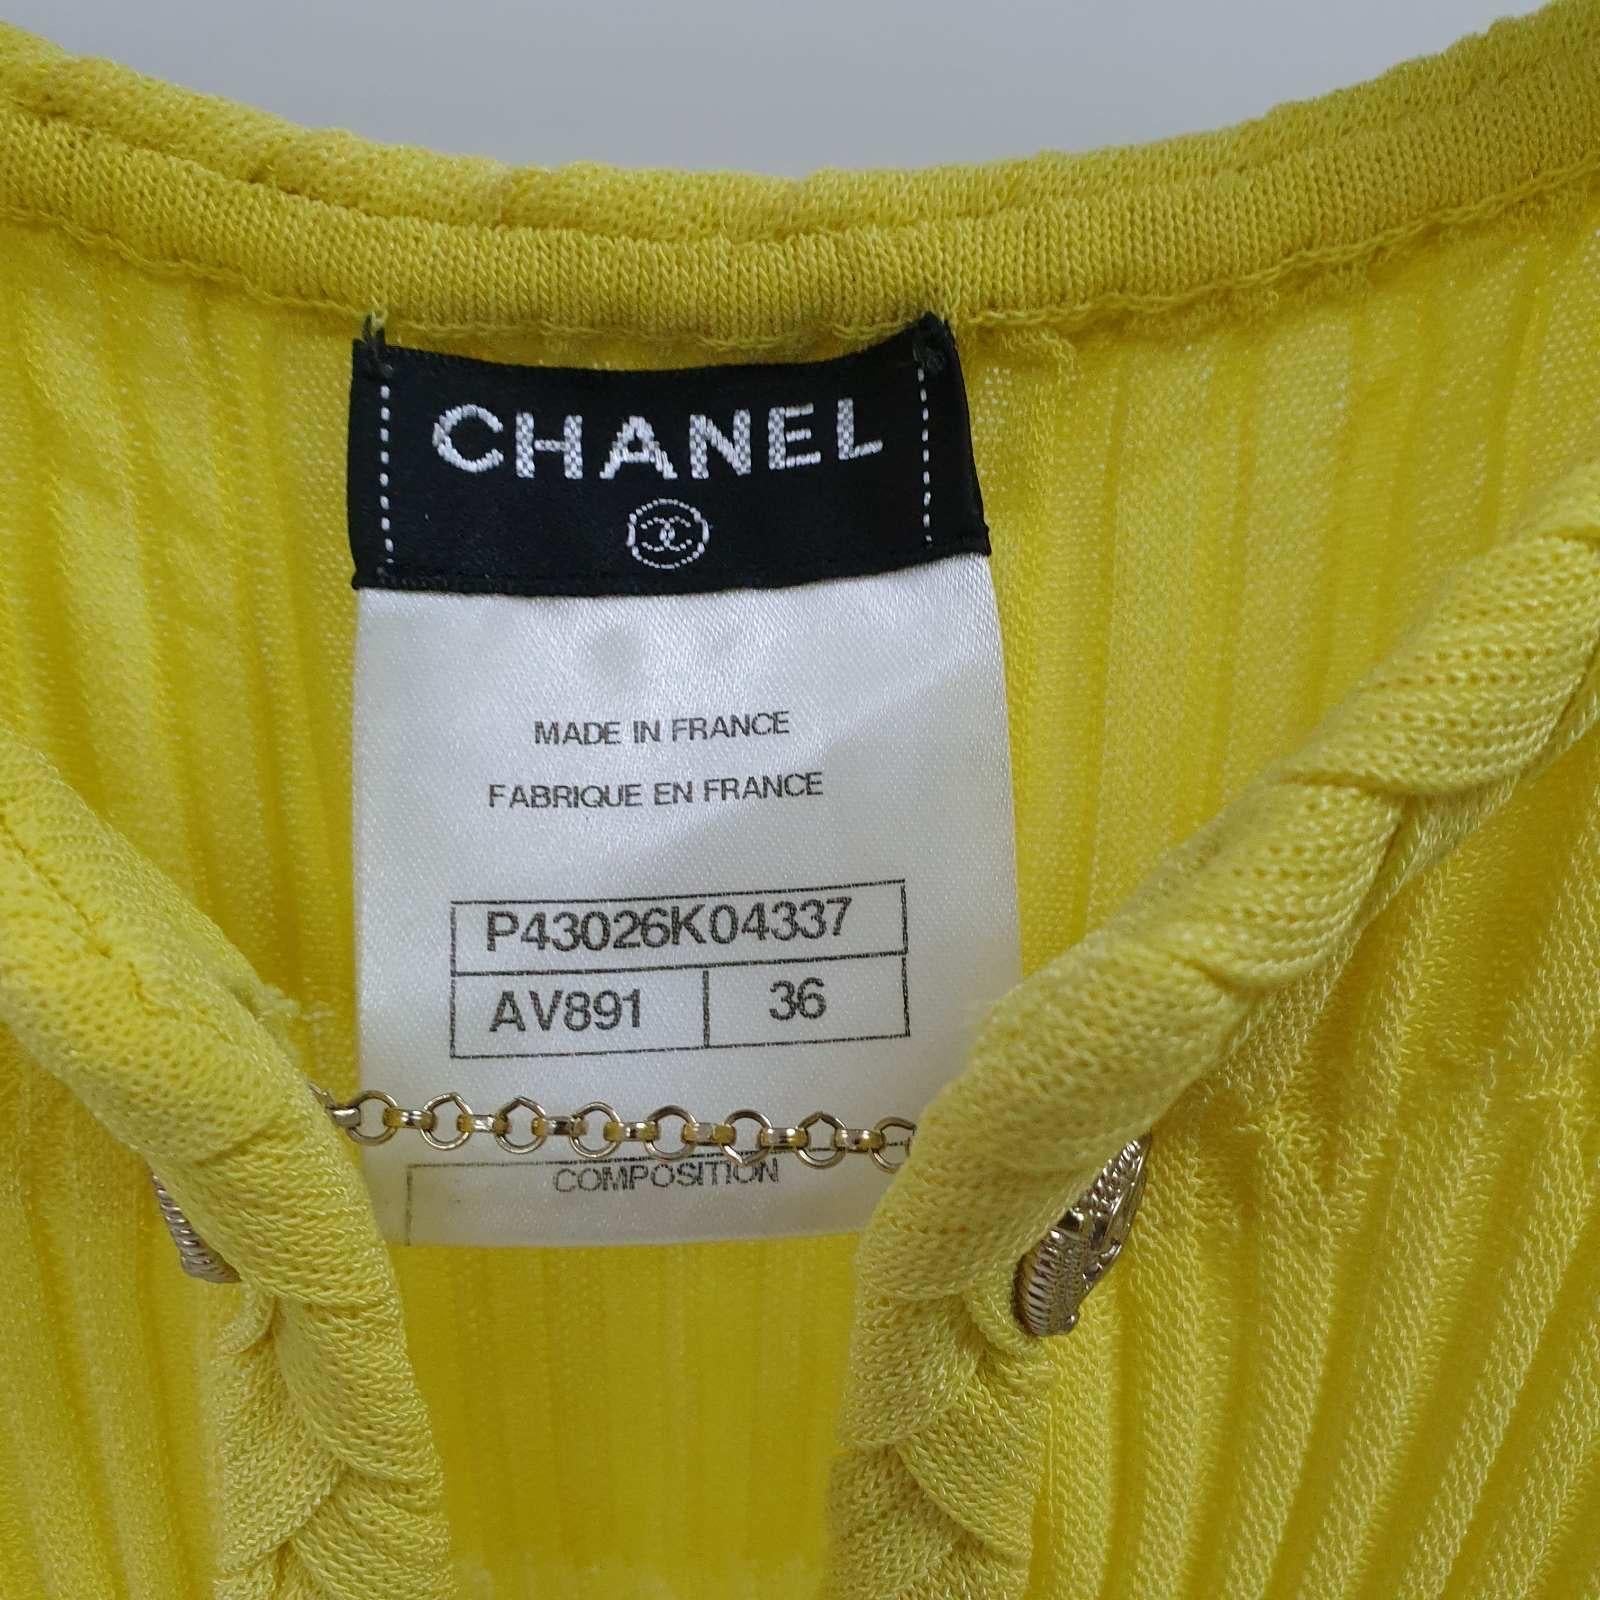 CHANEL Yellow Textured Cotton Jacquard Knit Sleeveless Dress For Sale 2